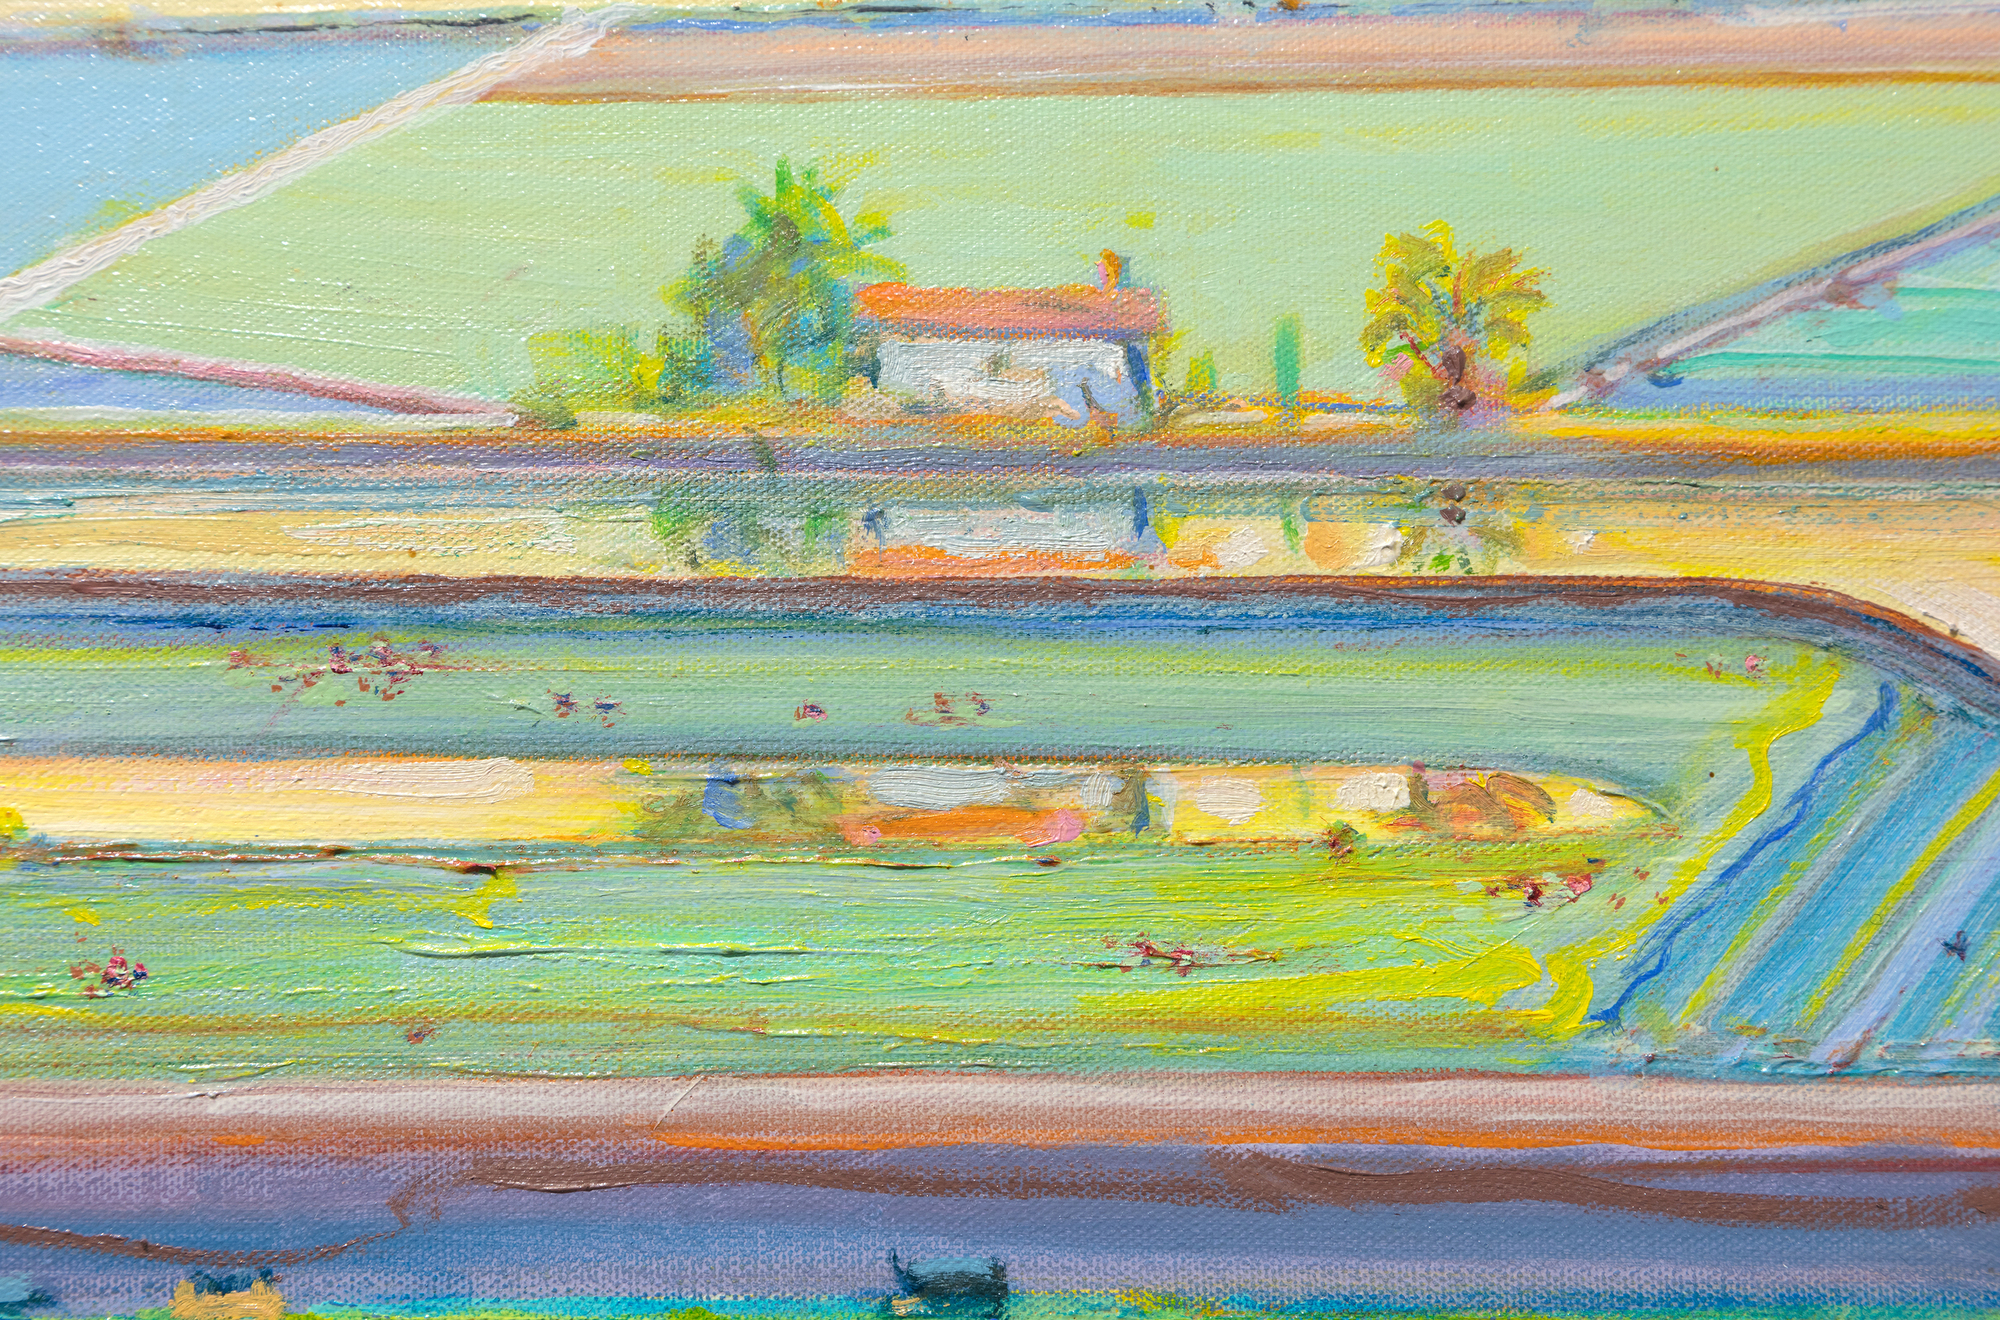 WAYNE THIEBAUD - The Riverhouse - huile sur toile - 18 x 35 3/4 in.